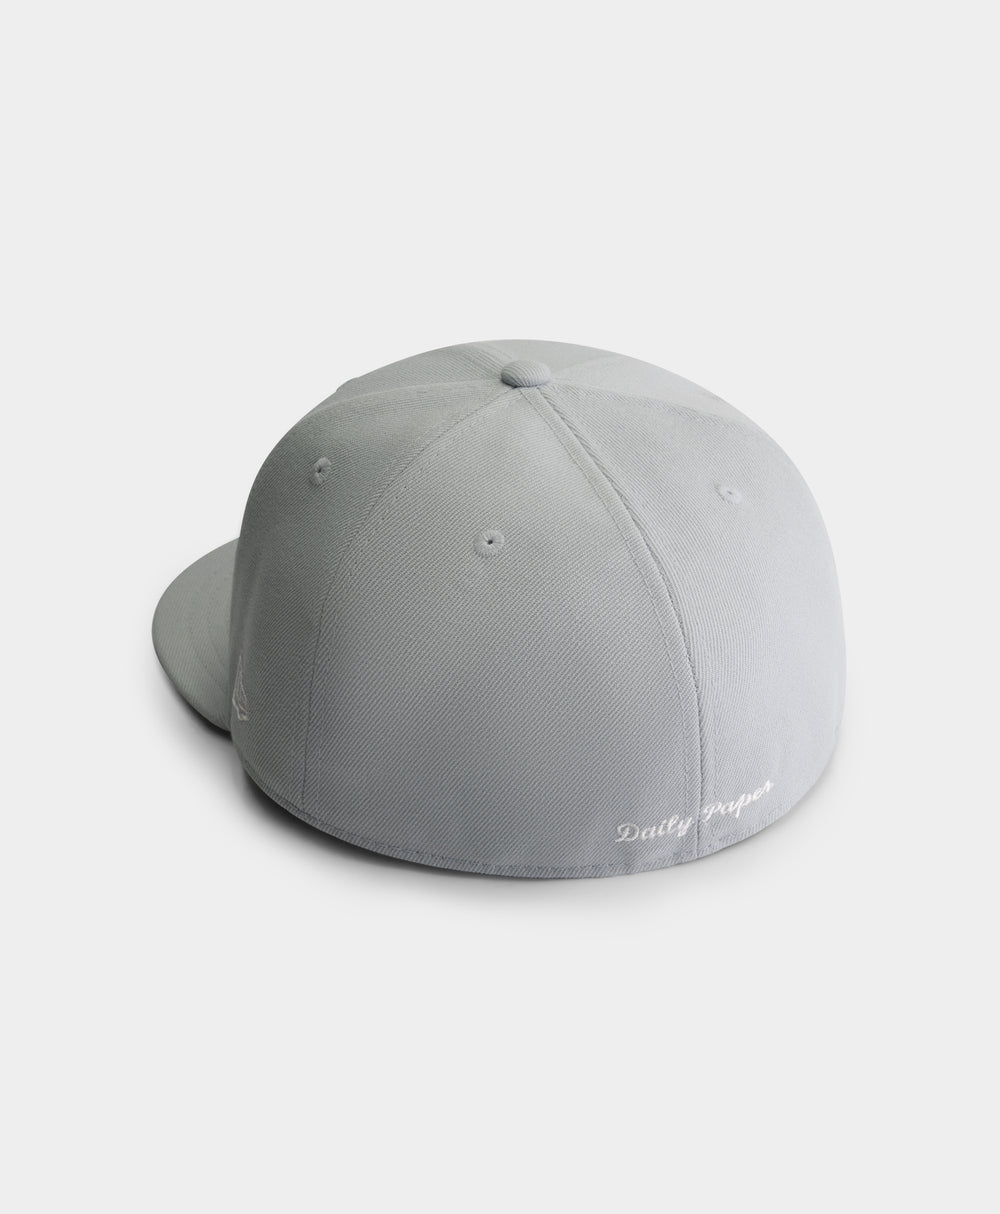 DP - Snow Grey Daily Paper x New Era 59FIFTY Fitted Cap - Packshot - Rear